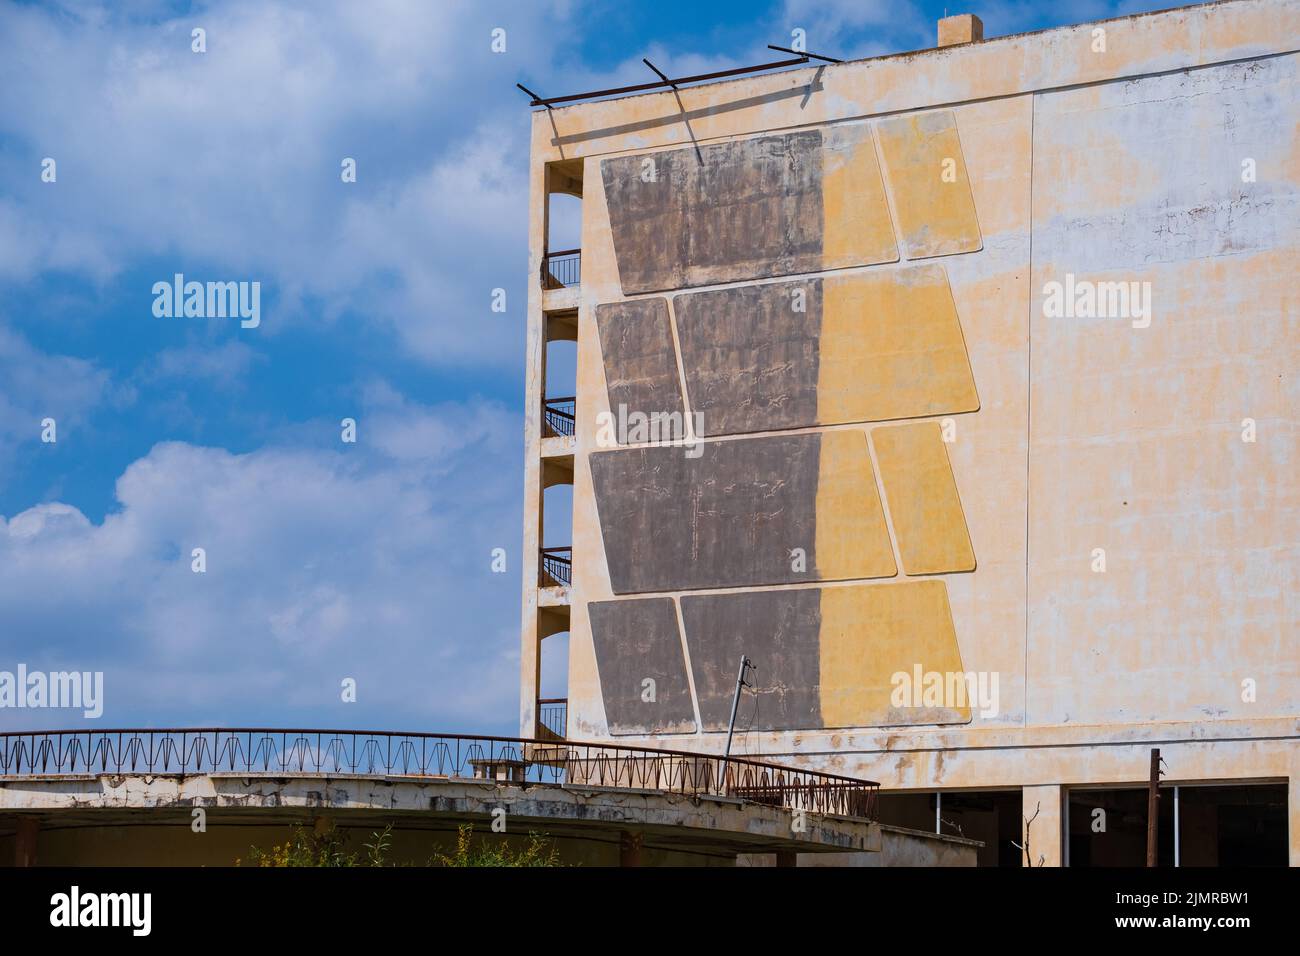 Facade of an abandoned building in the Ghost Resort City of Varosha Famagusta, Cyprus Stock Photo